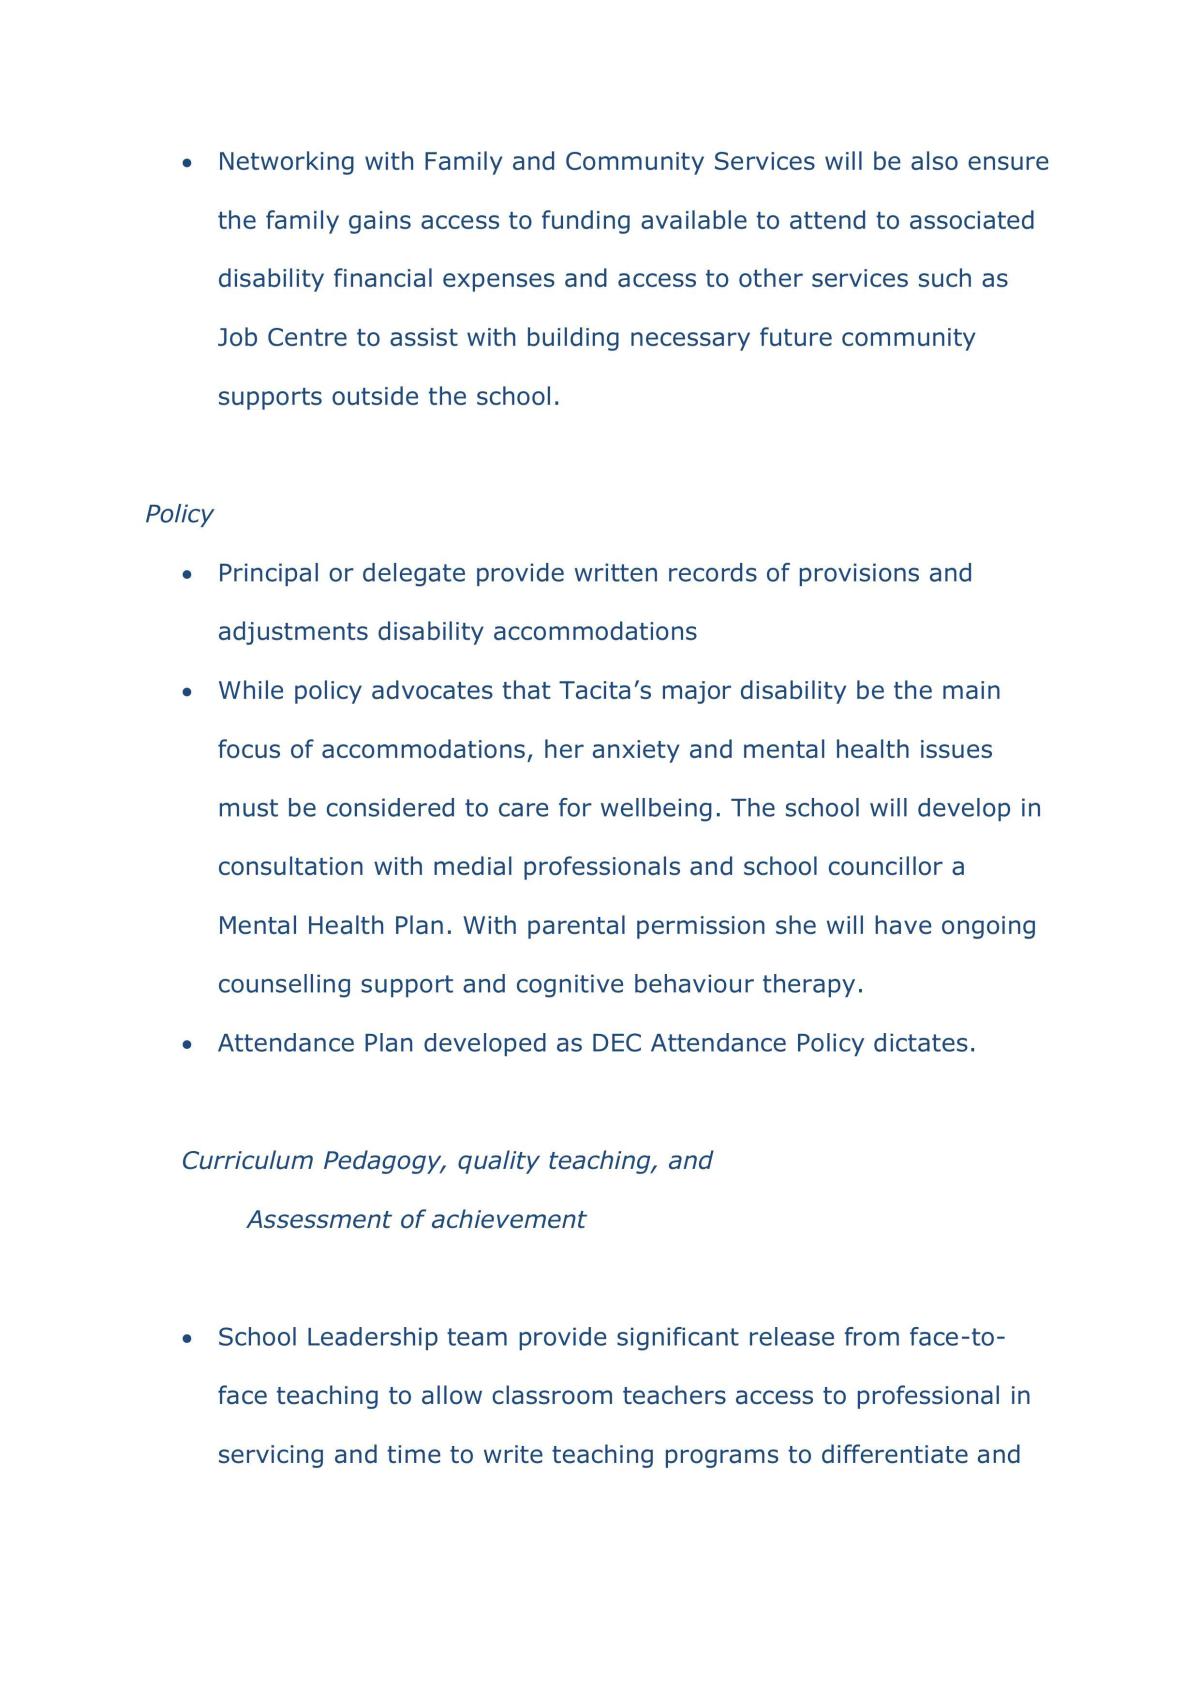 Assessment Task 1 Analysis of Policy Frameworks - Page 15